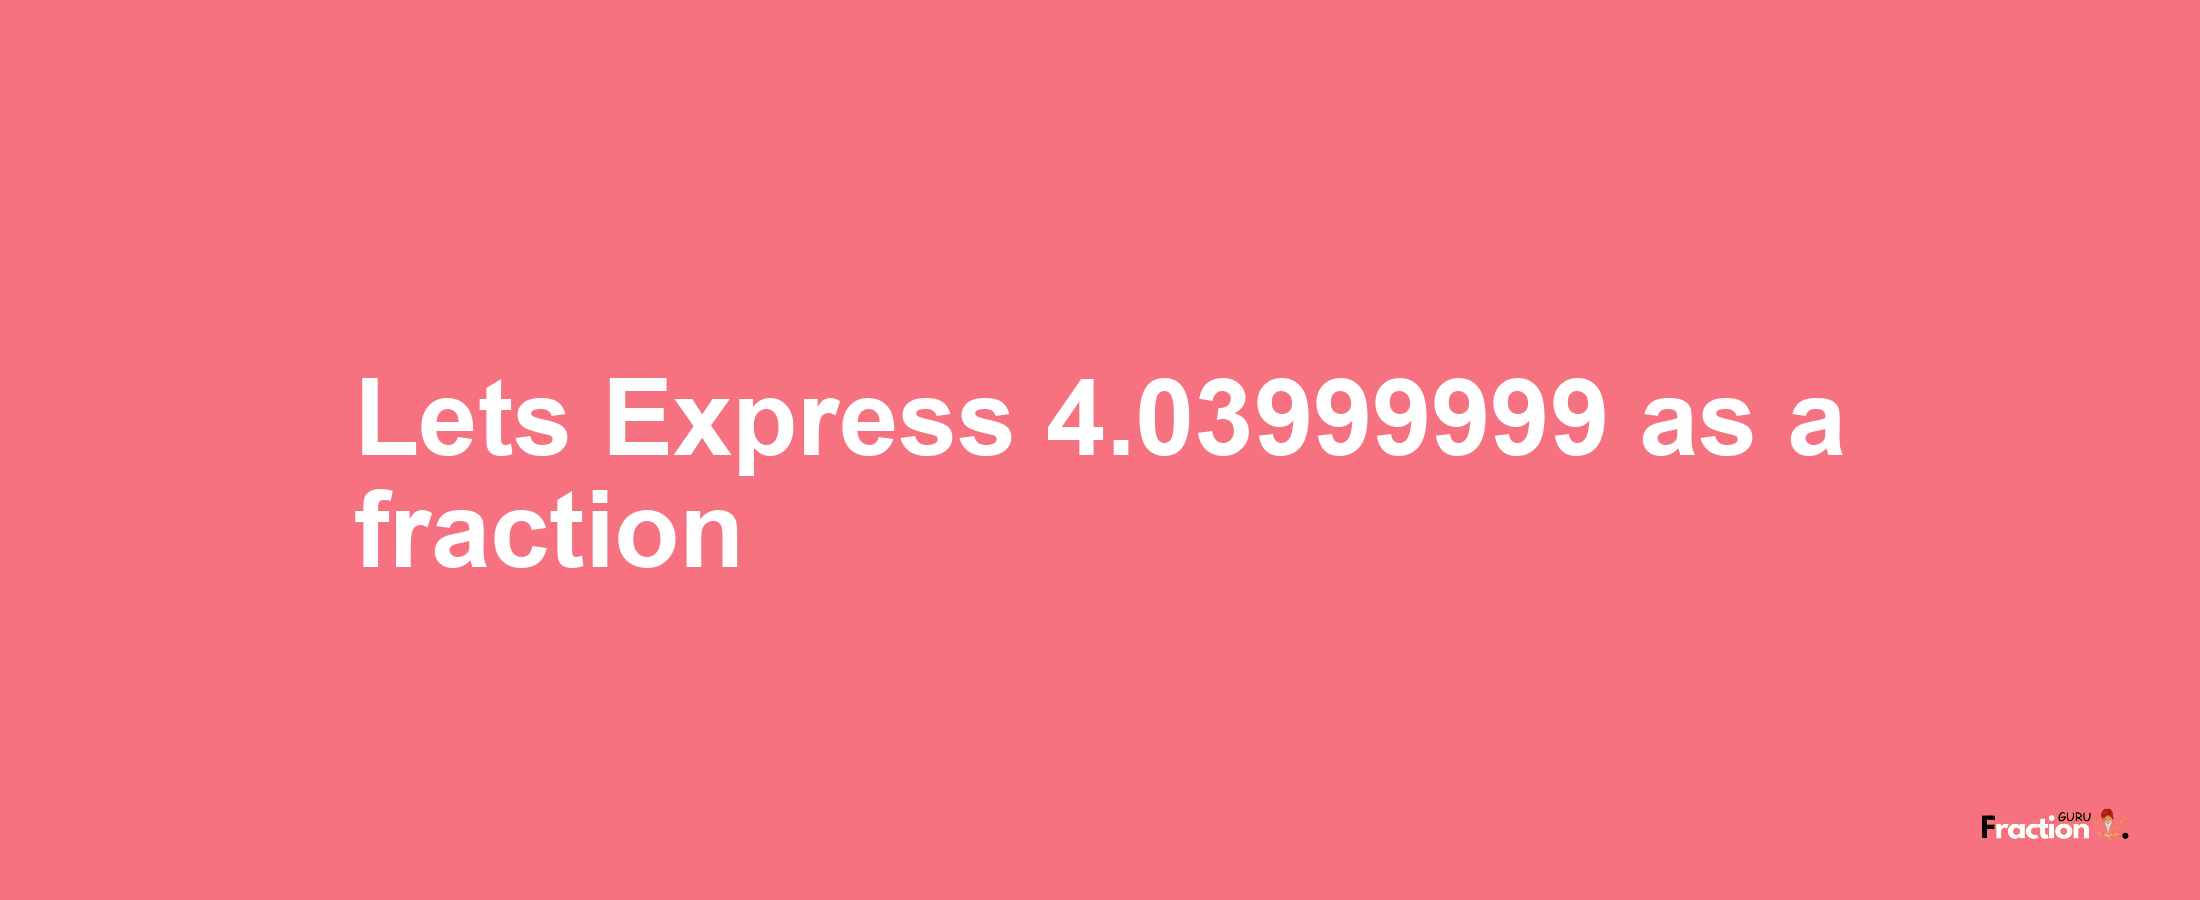 Lets Express 4.03999999 as afraction